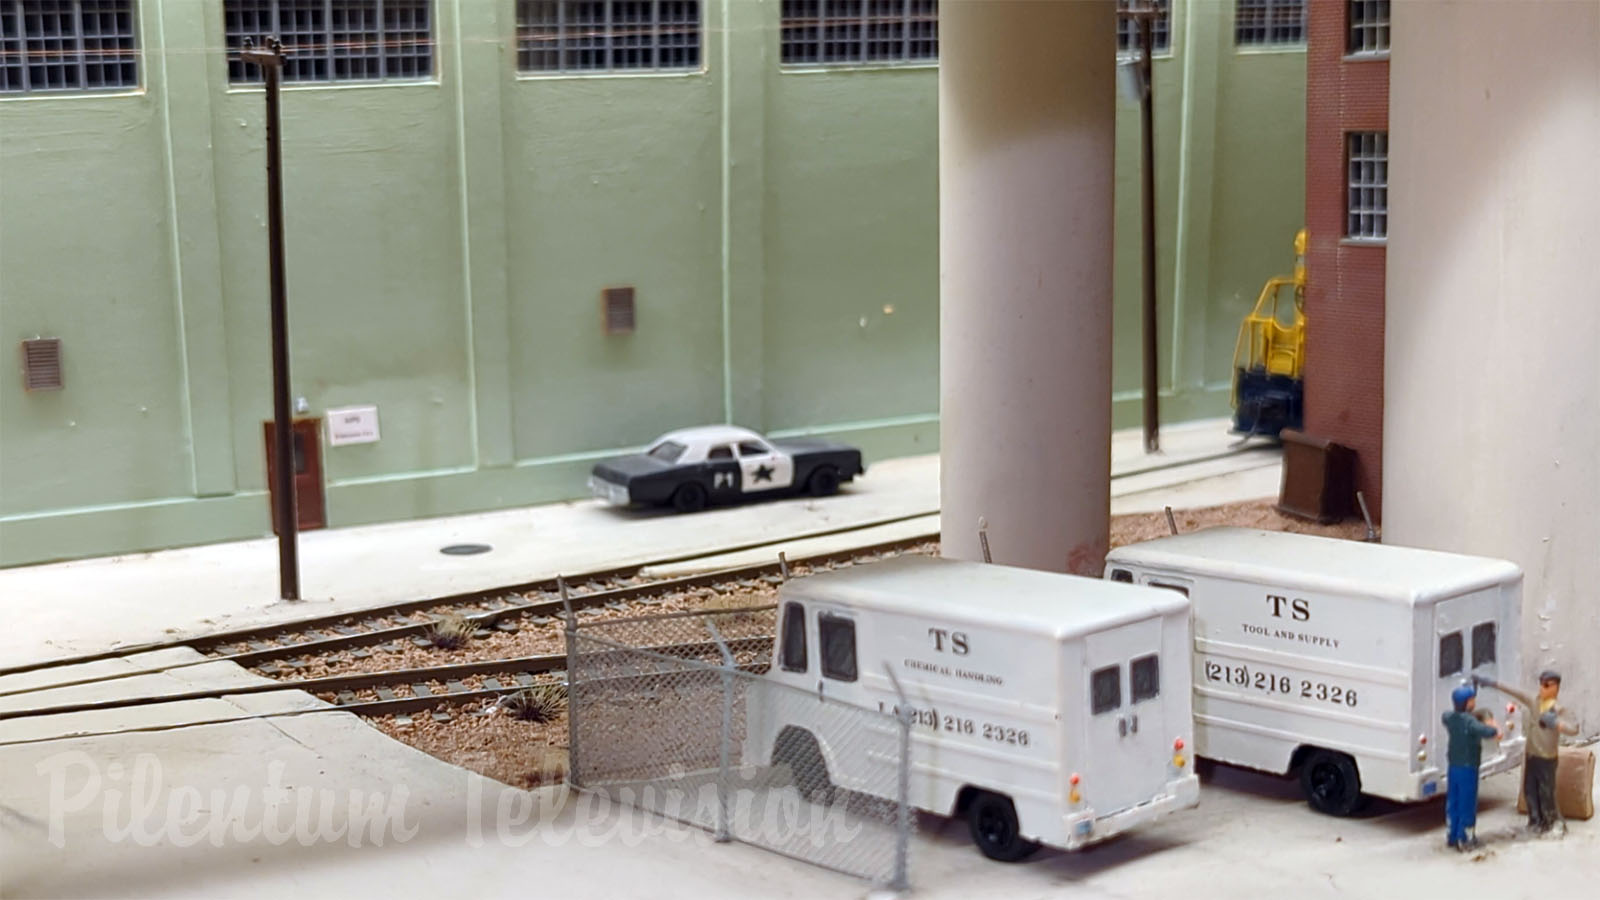 Los Angeles HO Scale Model Railroad Layout - Atlas, Athearn, Walthers and Intermountain Model Trains